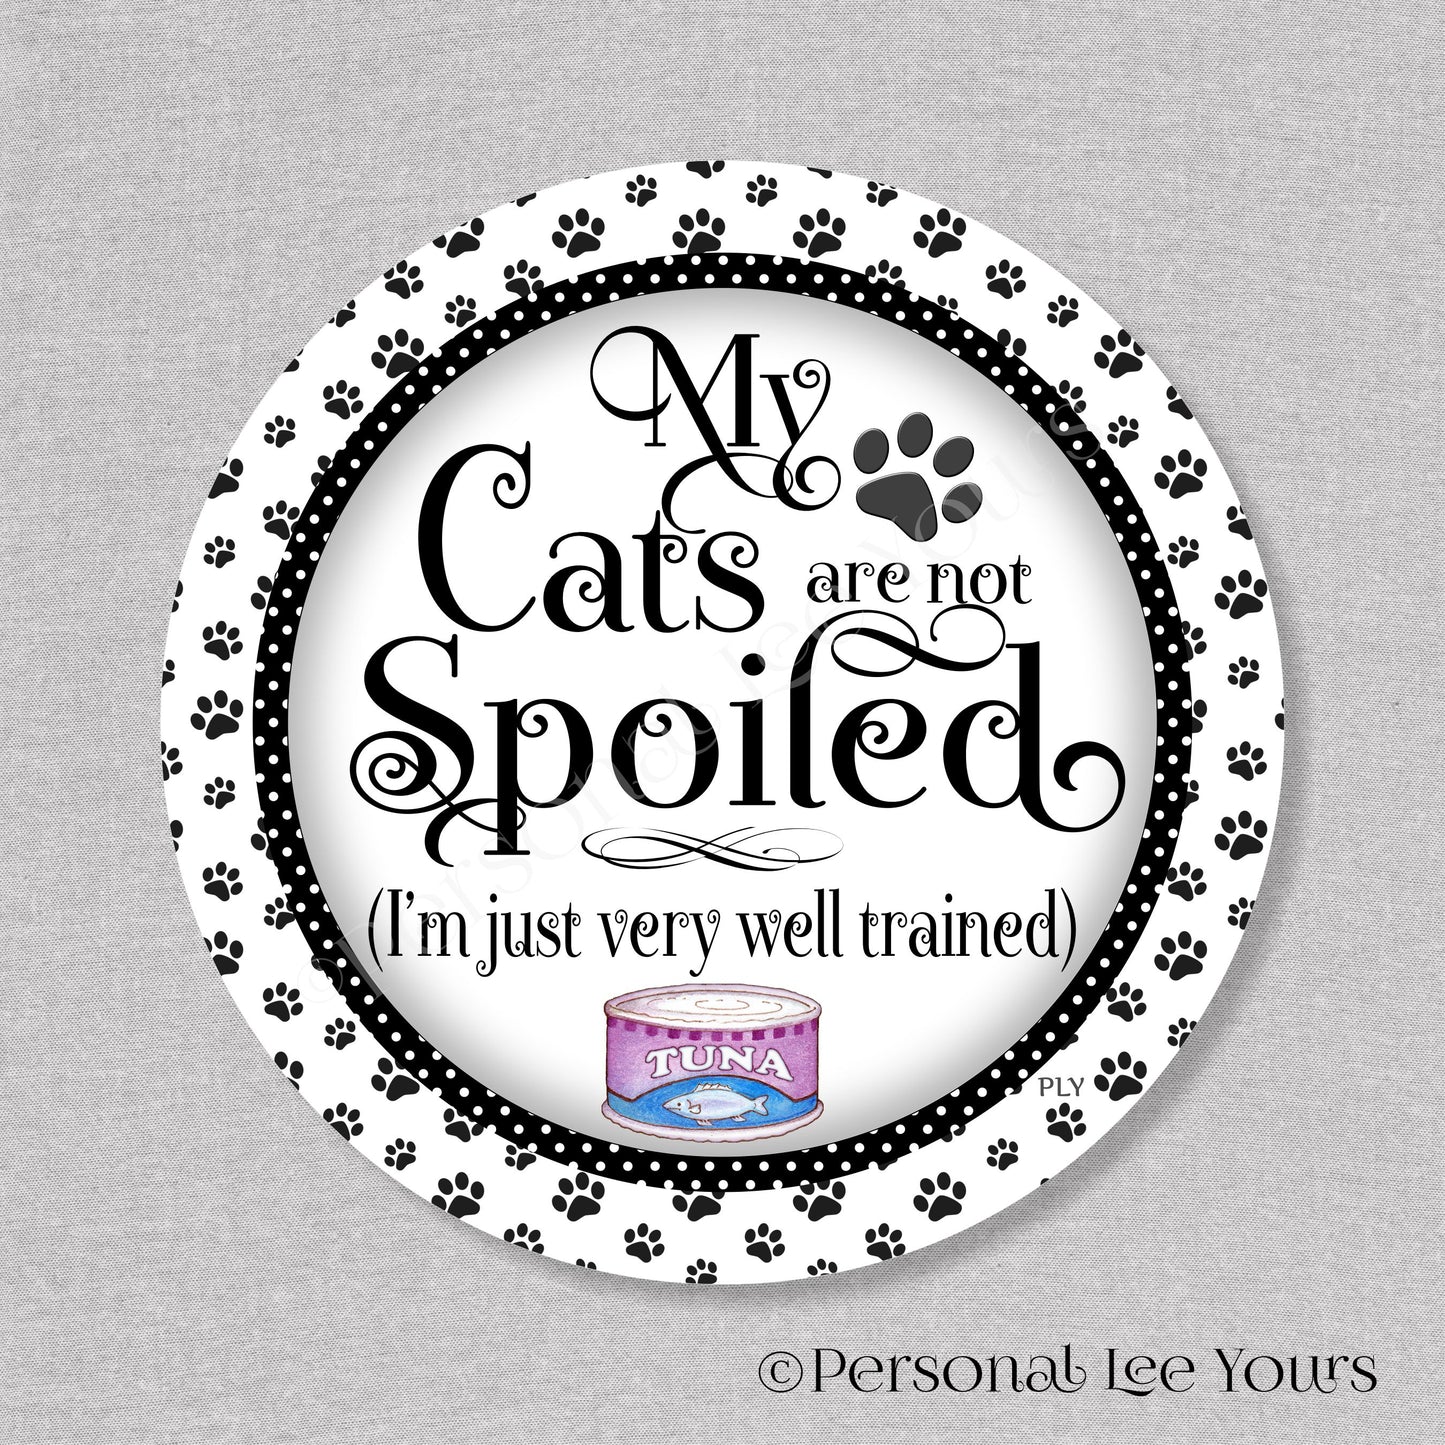 Wreath Sign * My Cats Are Not Spoiled * Black * Round * Lightweight Metal